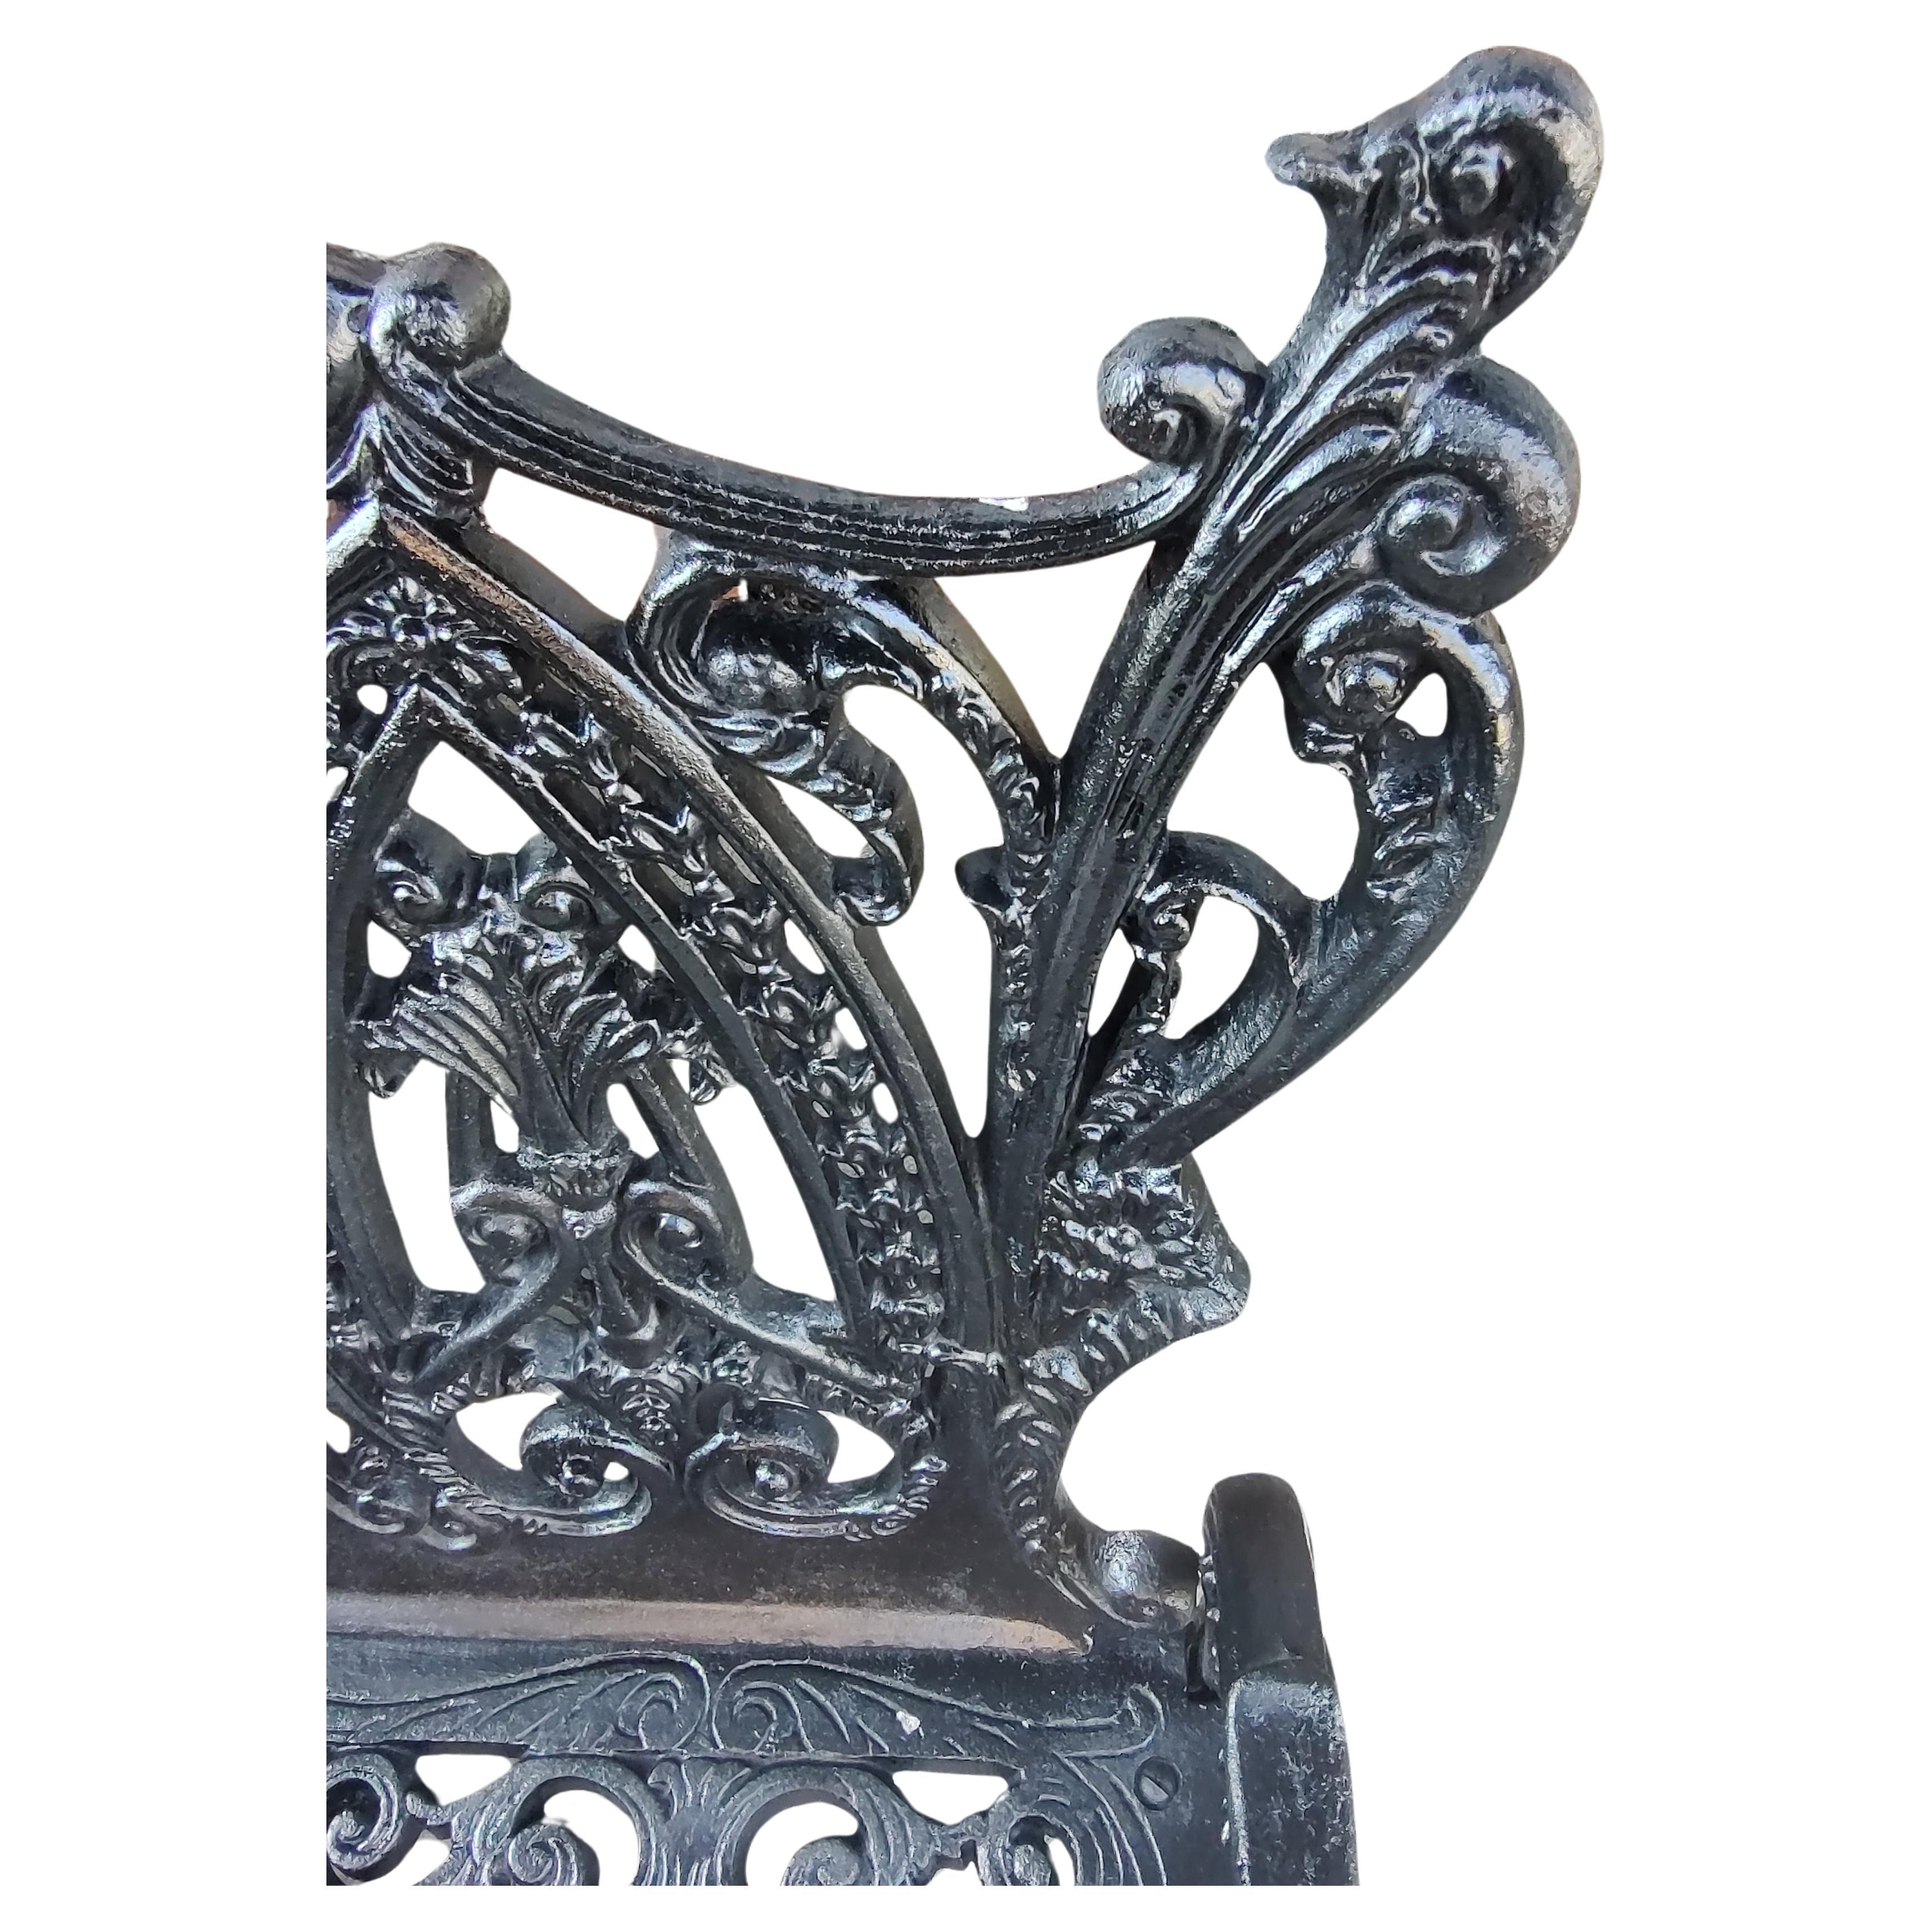 Fabulous and large garden bench in an Art Noveau style with spectacular details in the casting. Extremely ornate. In excellent vintage condition with minimal wear, was freshly painted black.